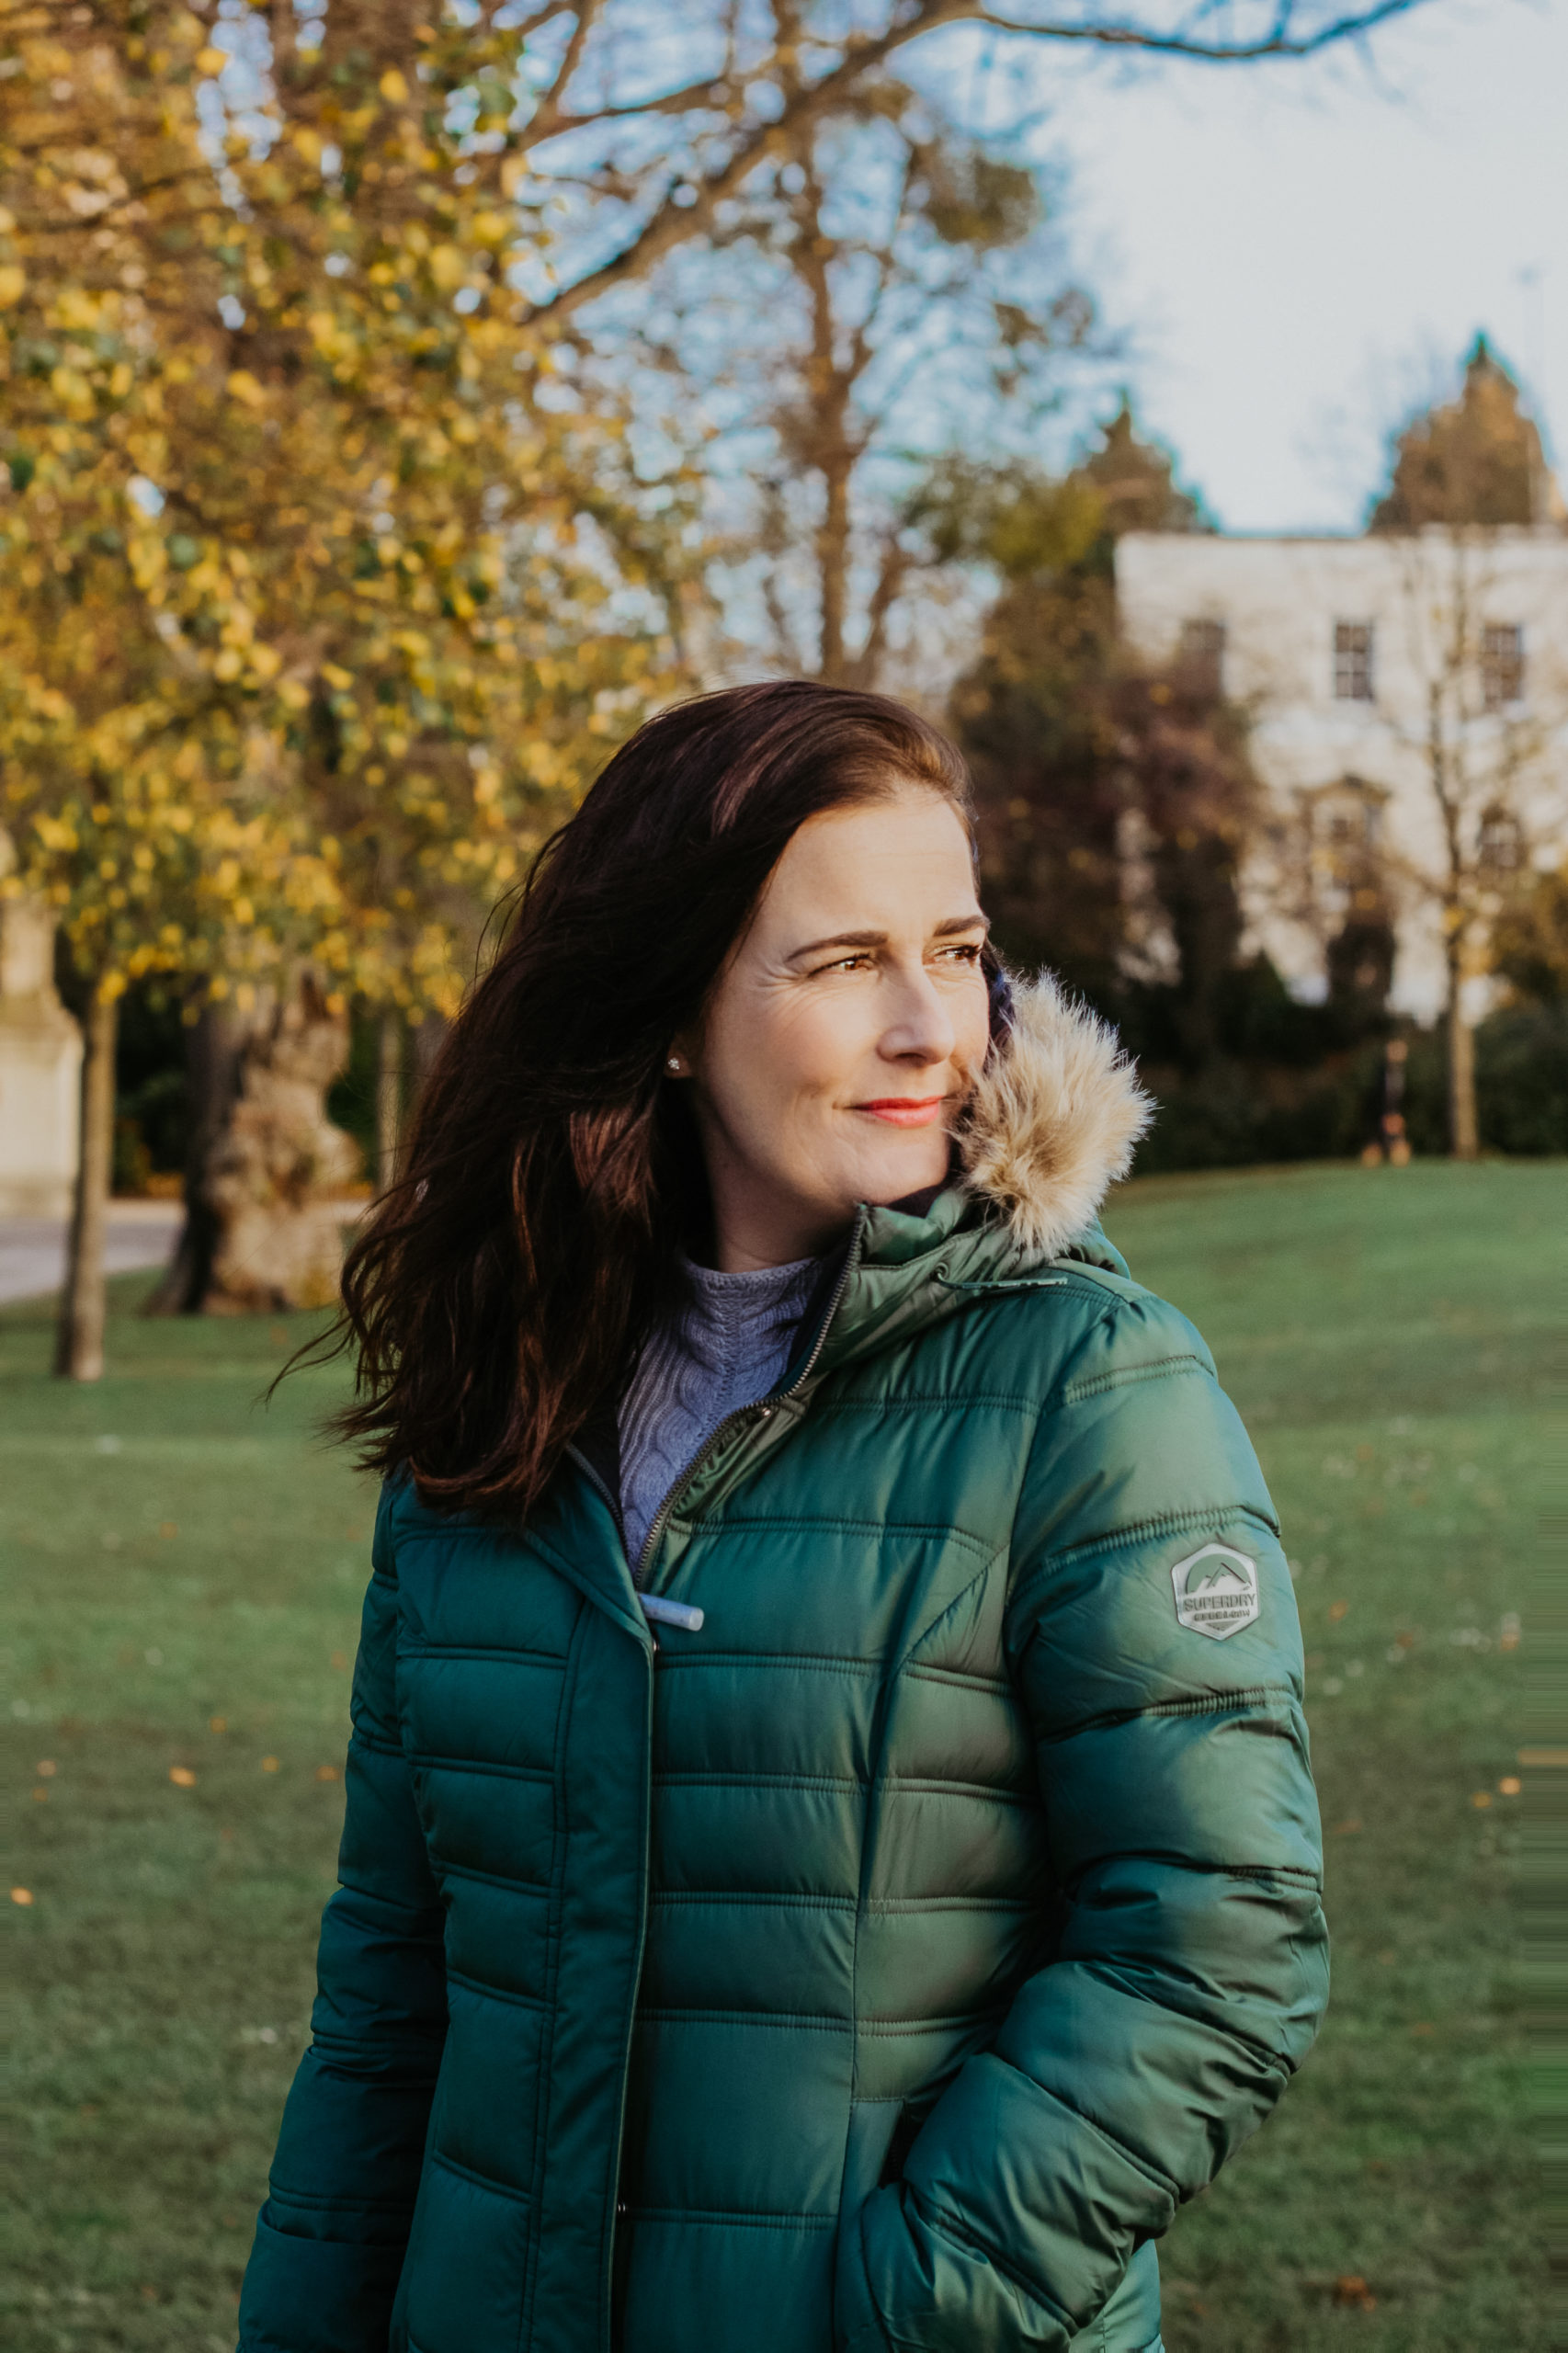 white woman with brunette hair in green puffer coat outside smiling in a park